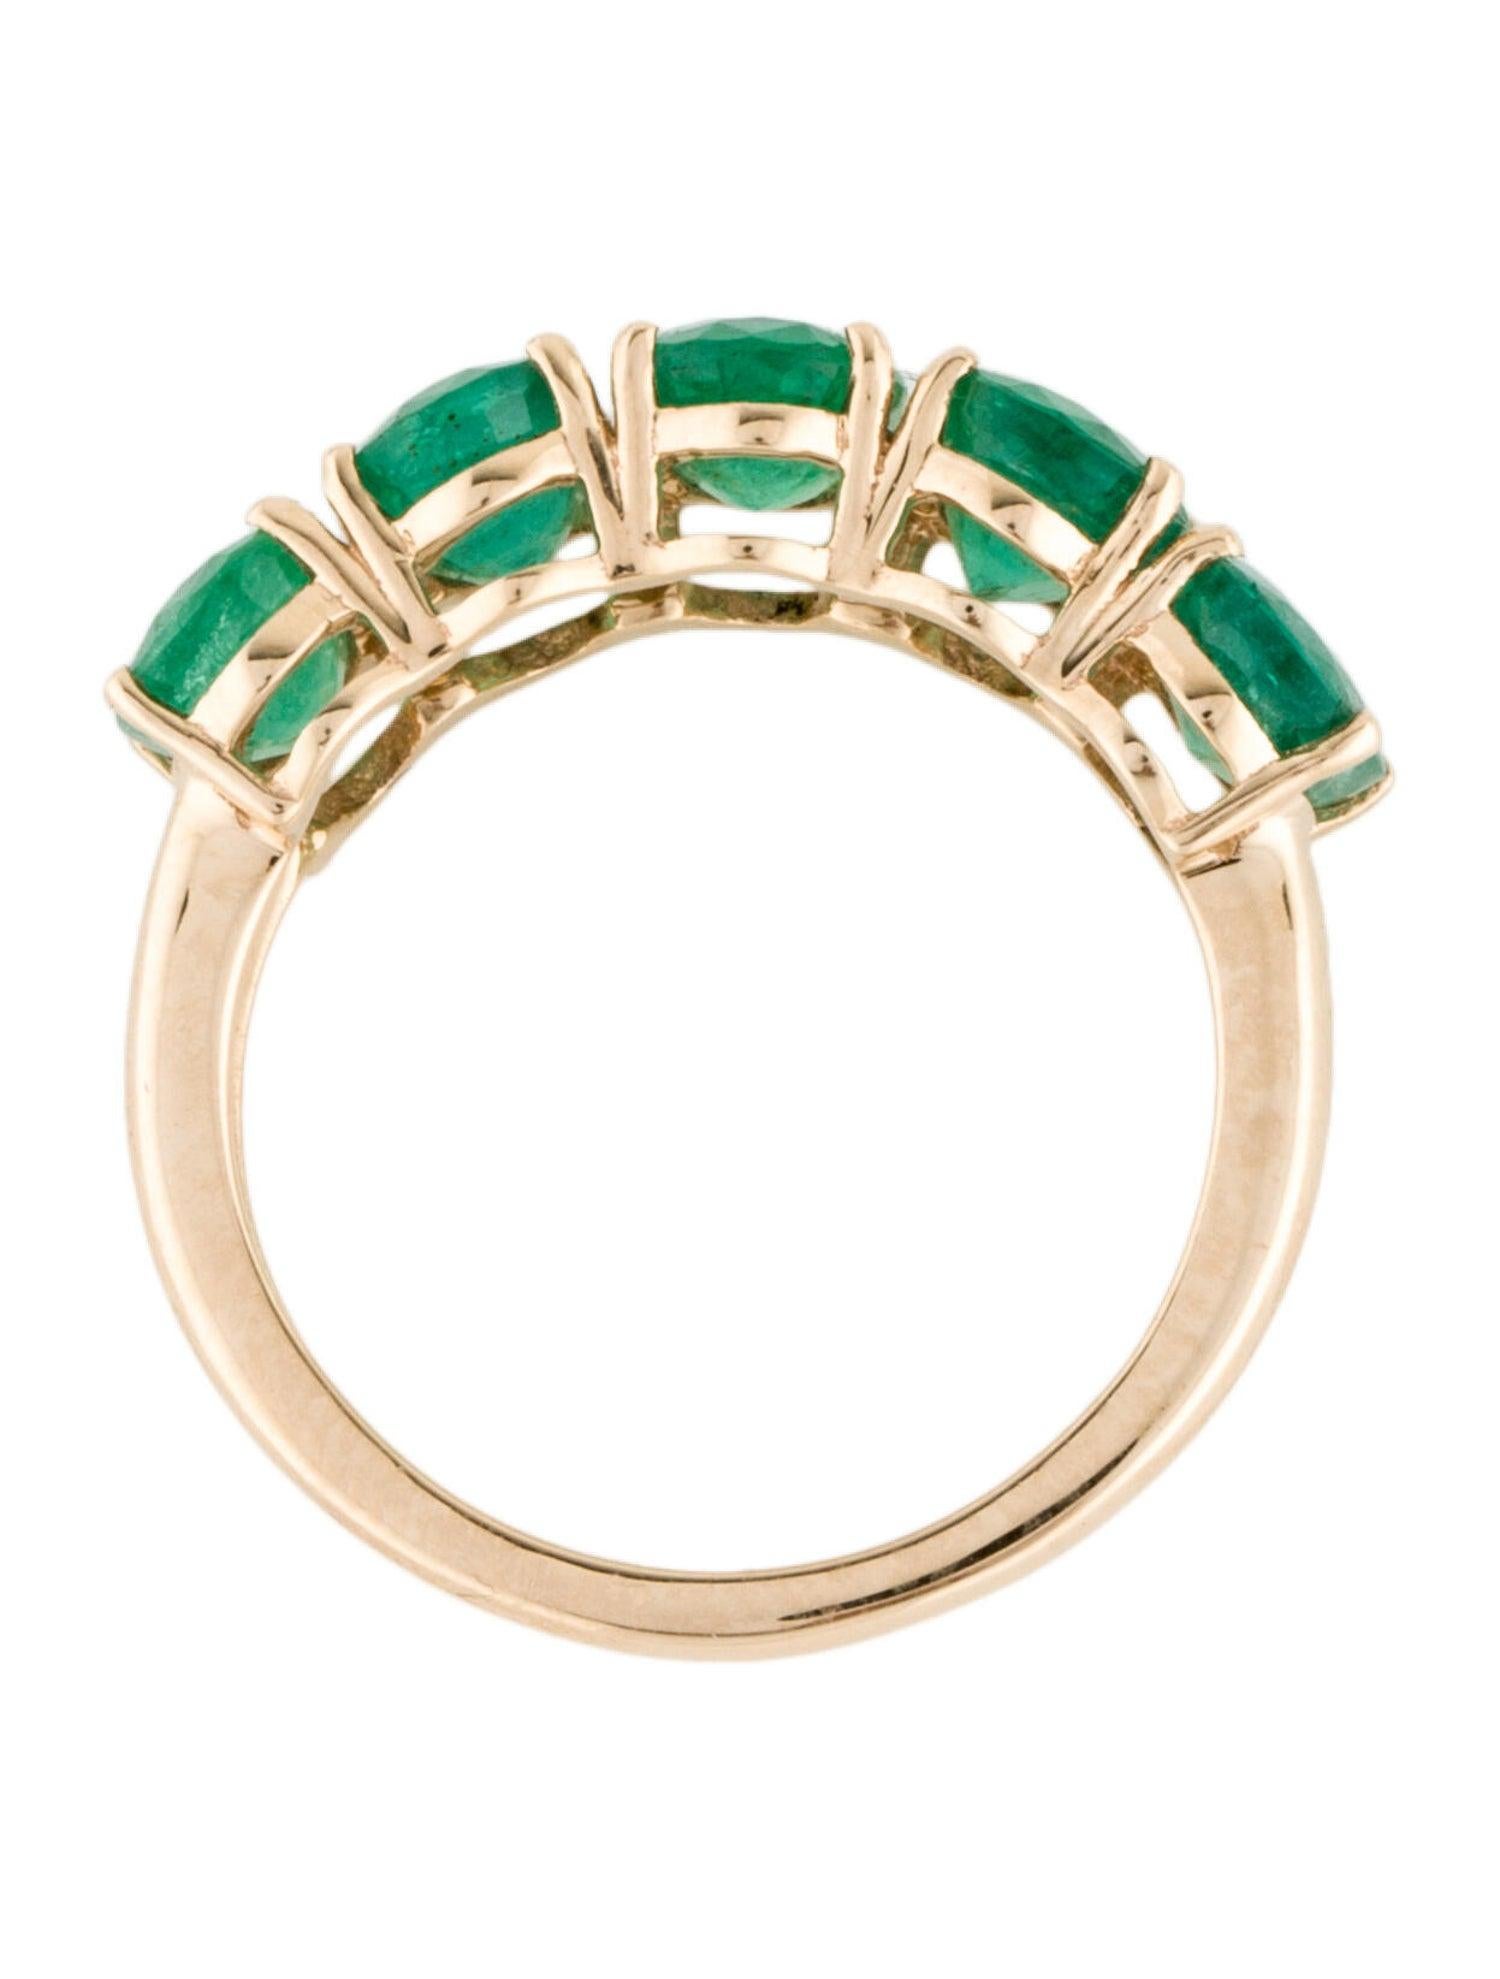 14K Emerald Band - Size 6.75 - Timeless Elegance, Luxury Jewelry Statement Ring In New Condition For Sale In Holtsville, NY